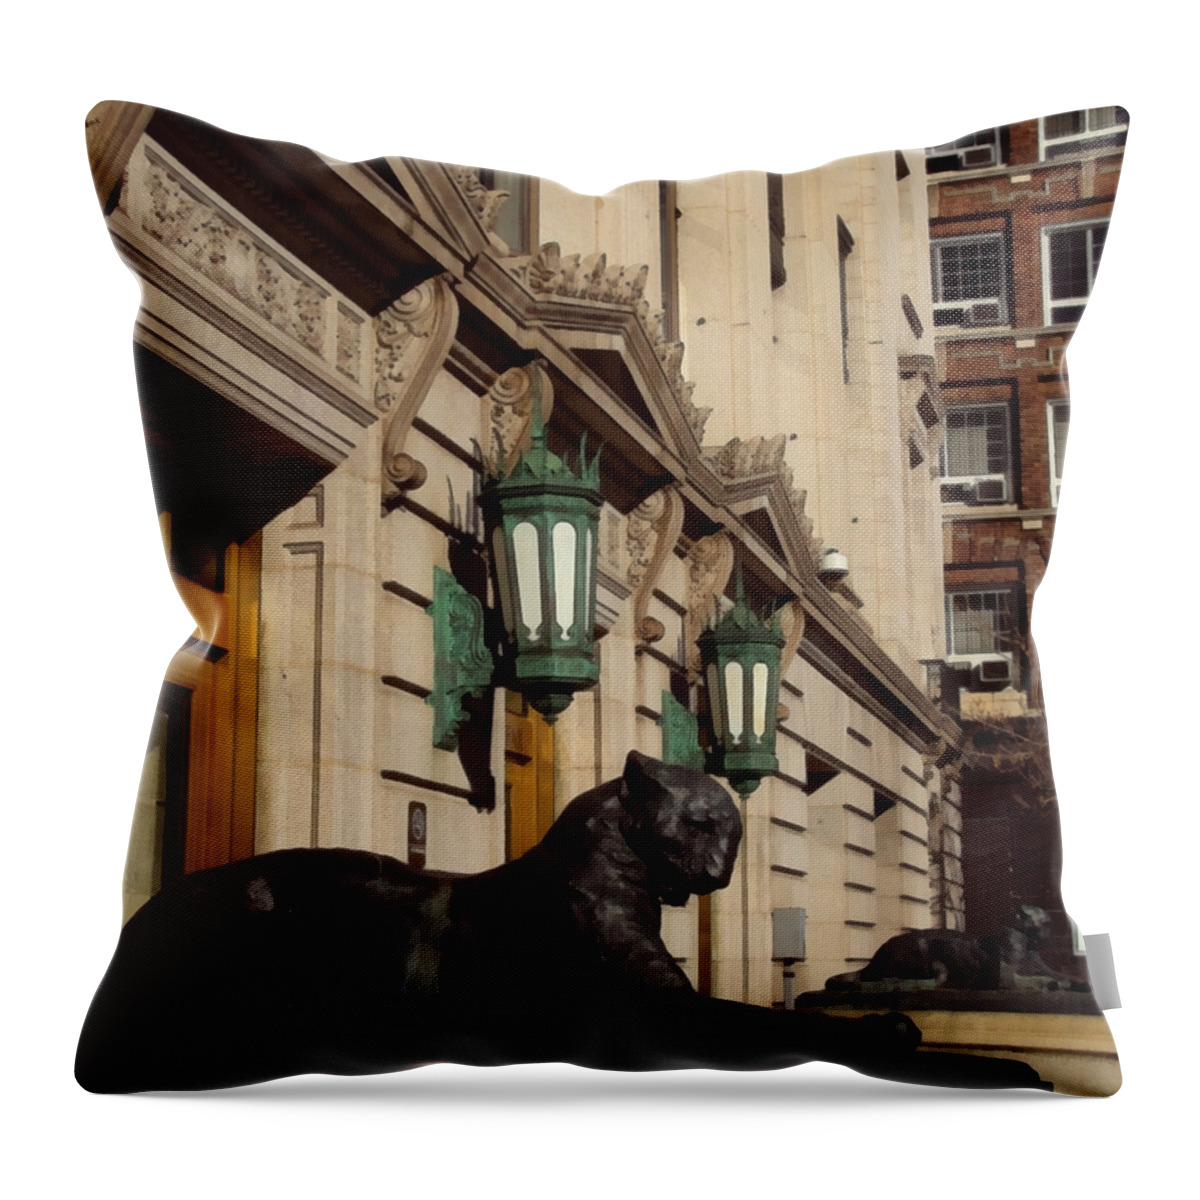 Denver Throw Pillow featuring the photograph Denver Architecture 2 by Angelina Tamez